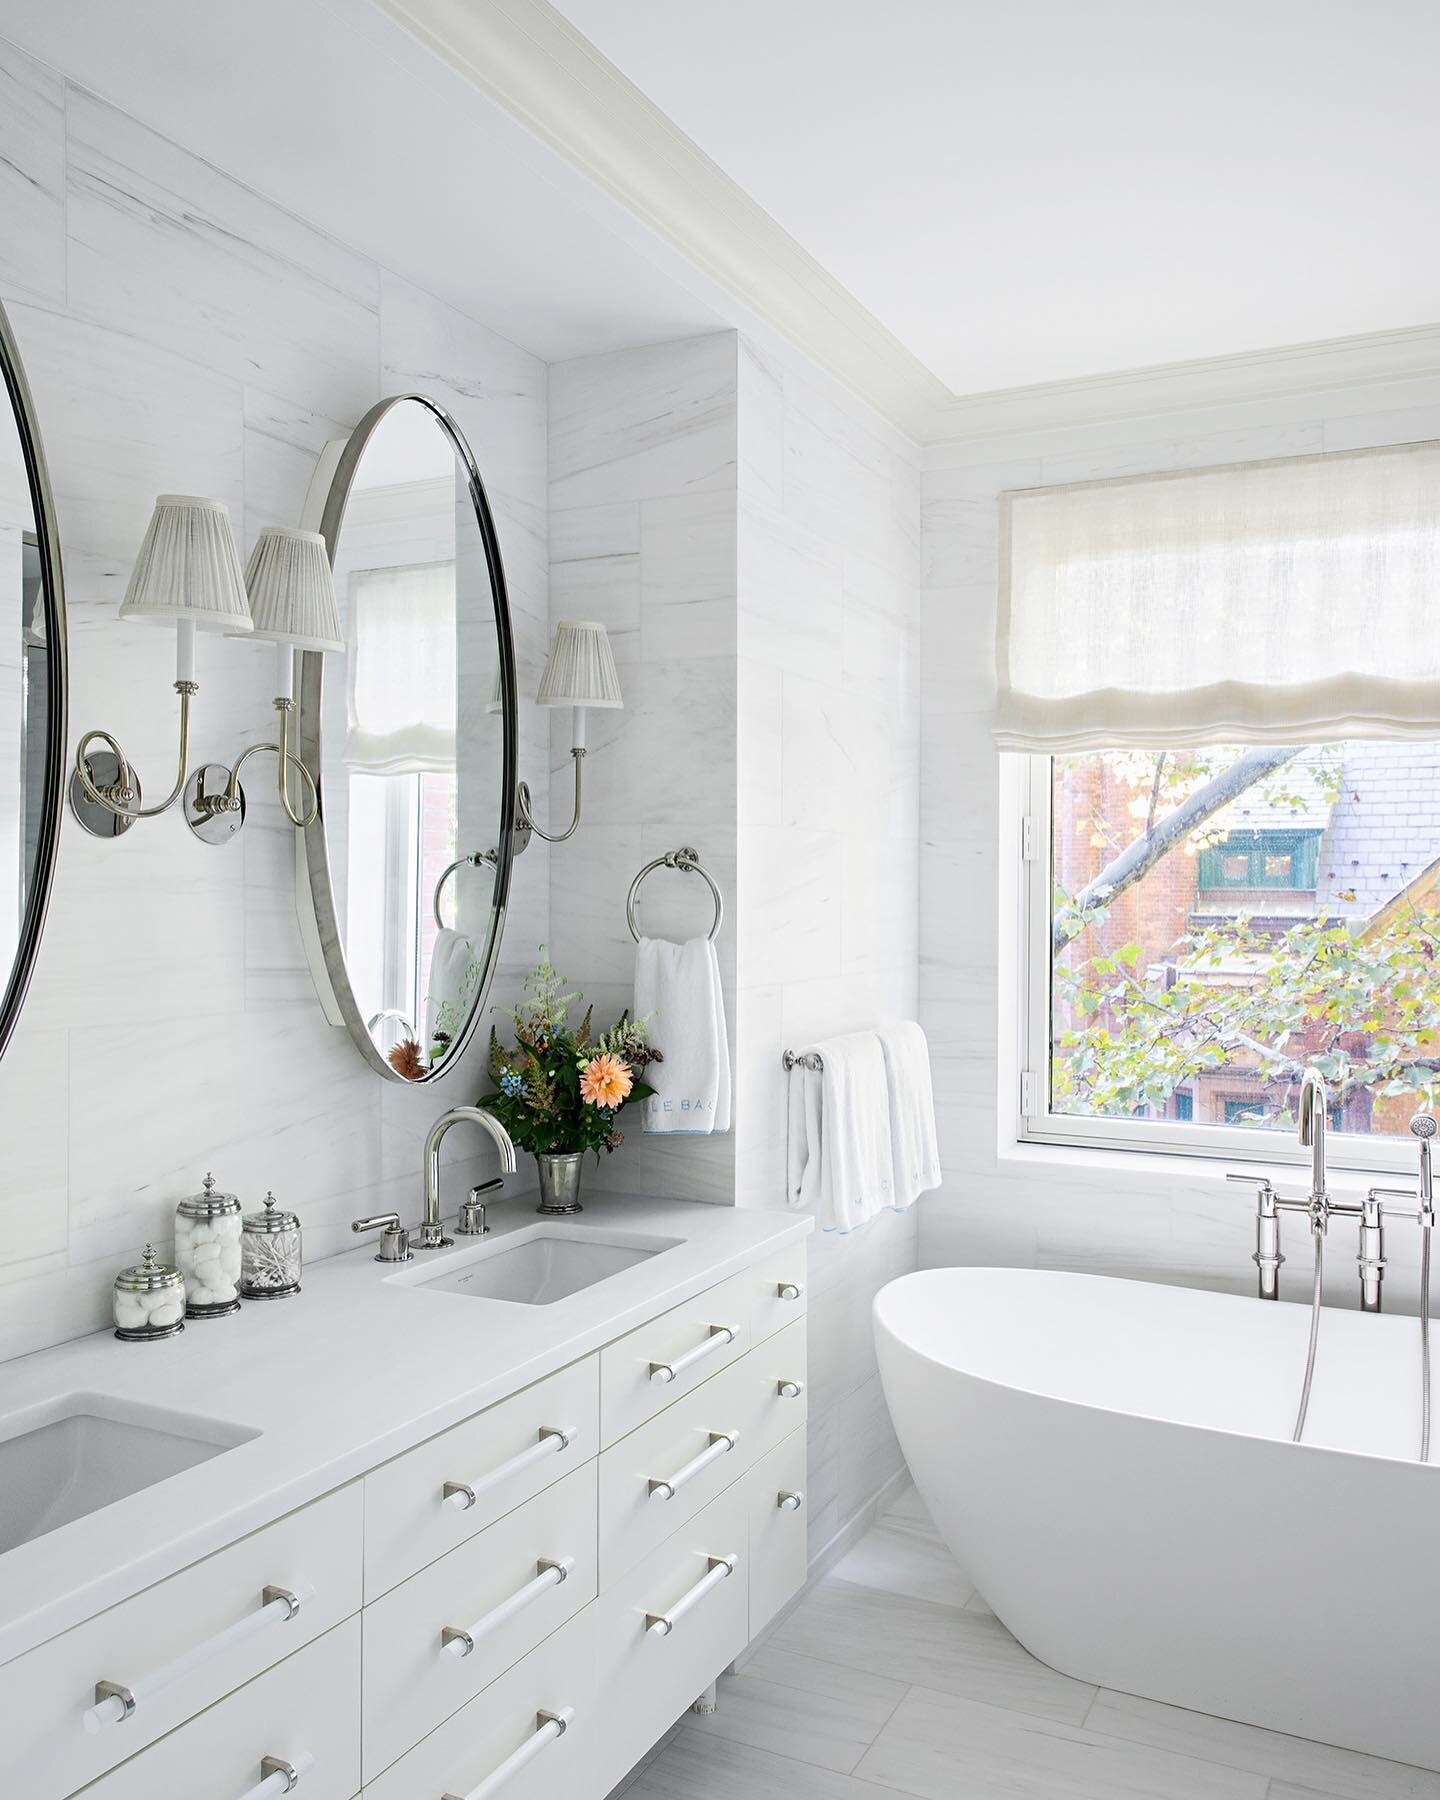 A serene primary bathroom in Chelsea.  Featuring custom oval medicine cabinets, @urbanelectricco Loopy sconces, @waterworks fixtures and honed dolomite tile from floor to ceiling
📸: @brittanyambridge